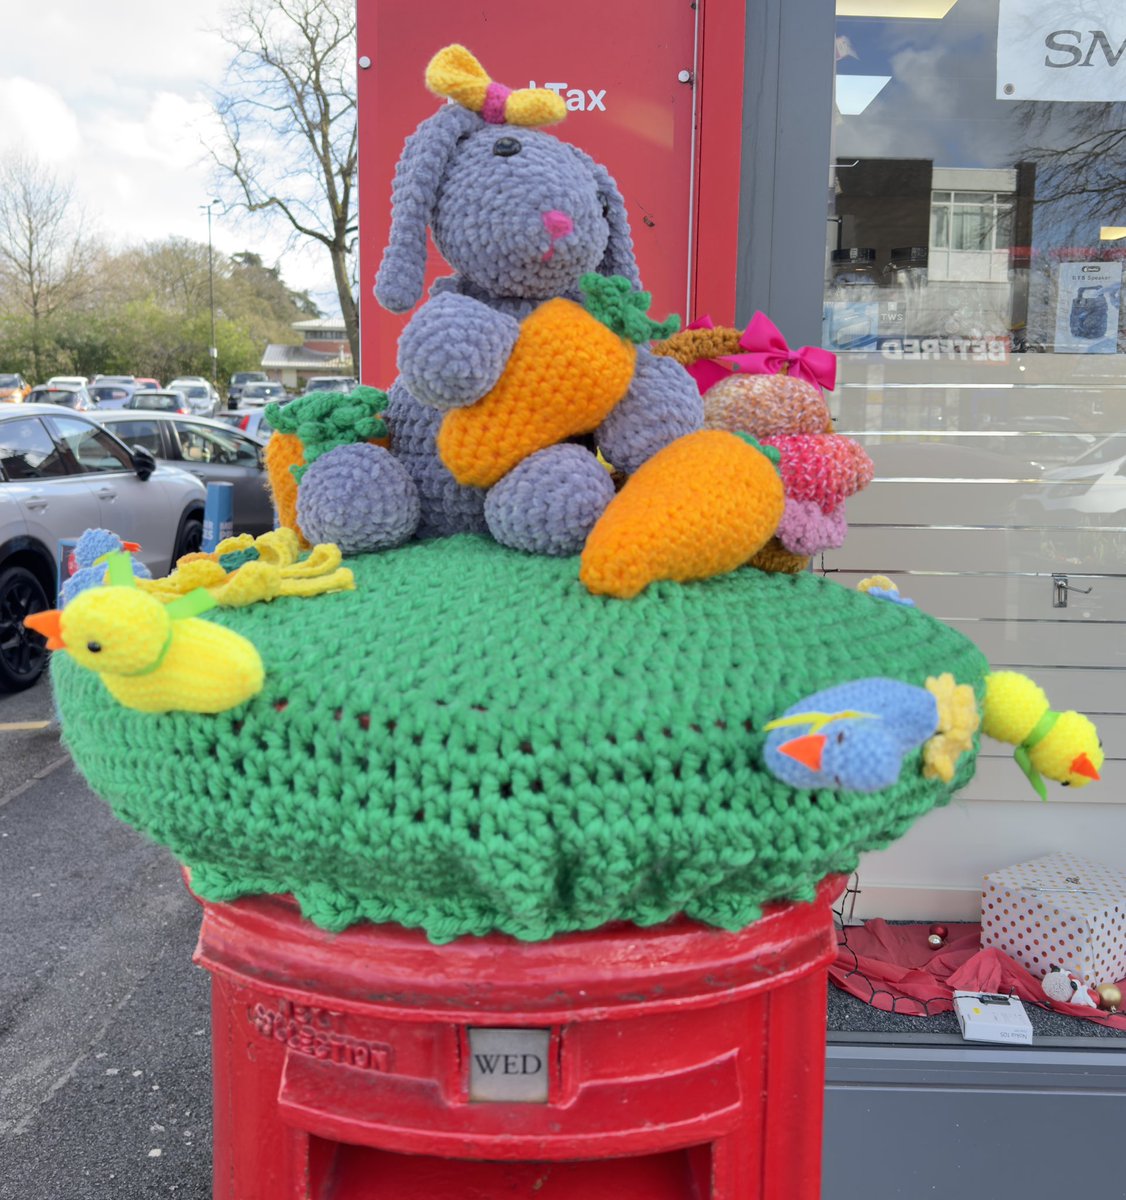 Lovely bit of #Easter yarn bomb outside the post office 😊 #Timperley